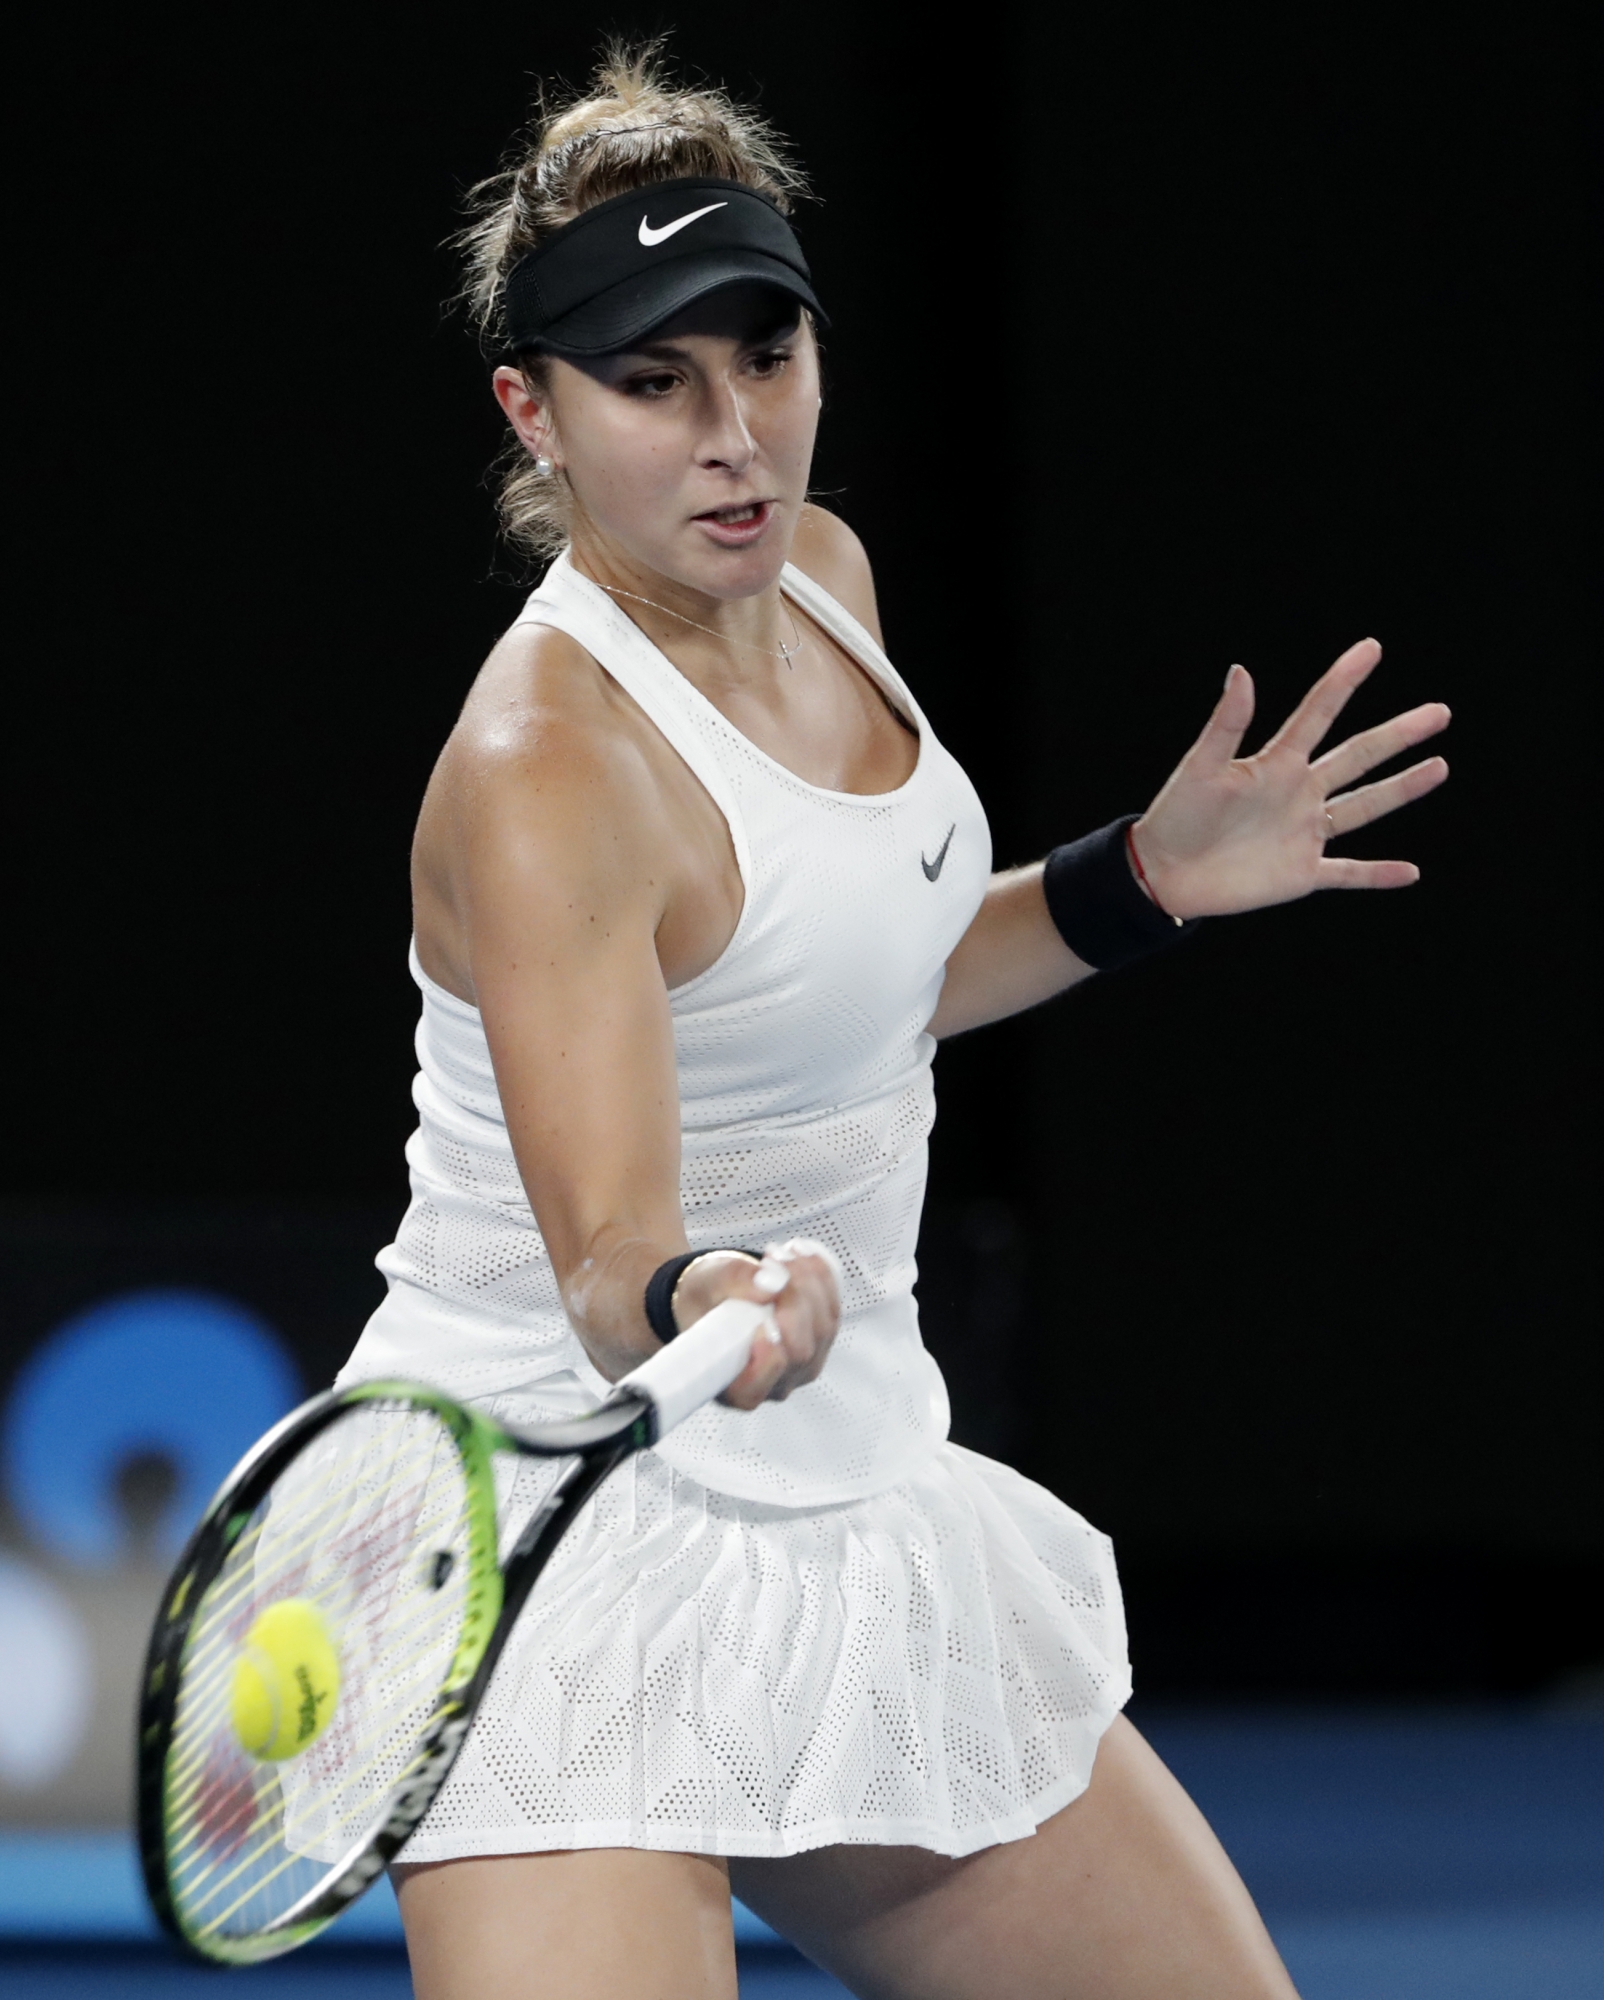 Switzerland's Belinda Bencic makes a forehand return to United States' Venus Williams during their first round match at the Australian Open tennis championships in Melbourne, Australia, Monday, Jan. 15, 2018. (AP Photo/Vincent Thian) Australian Open Tennis